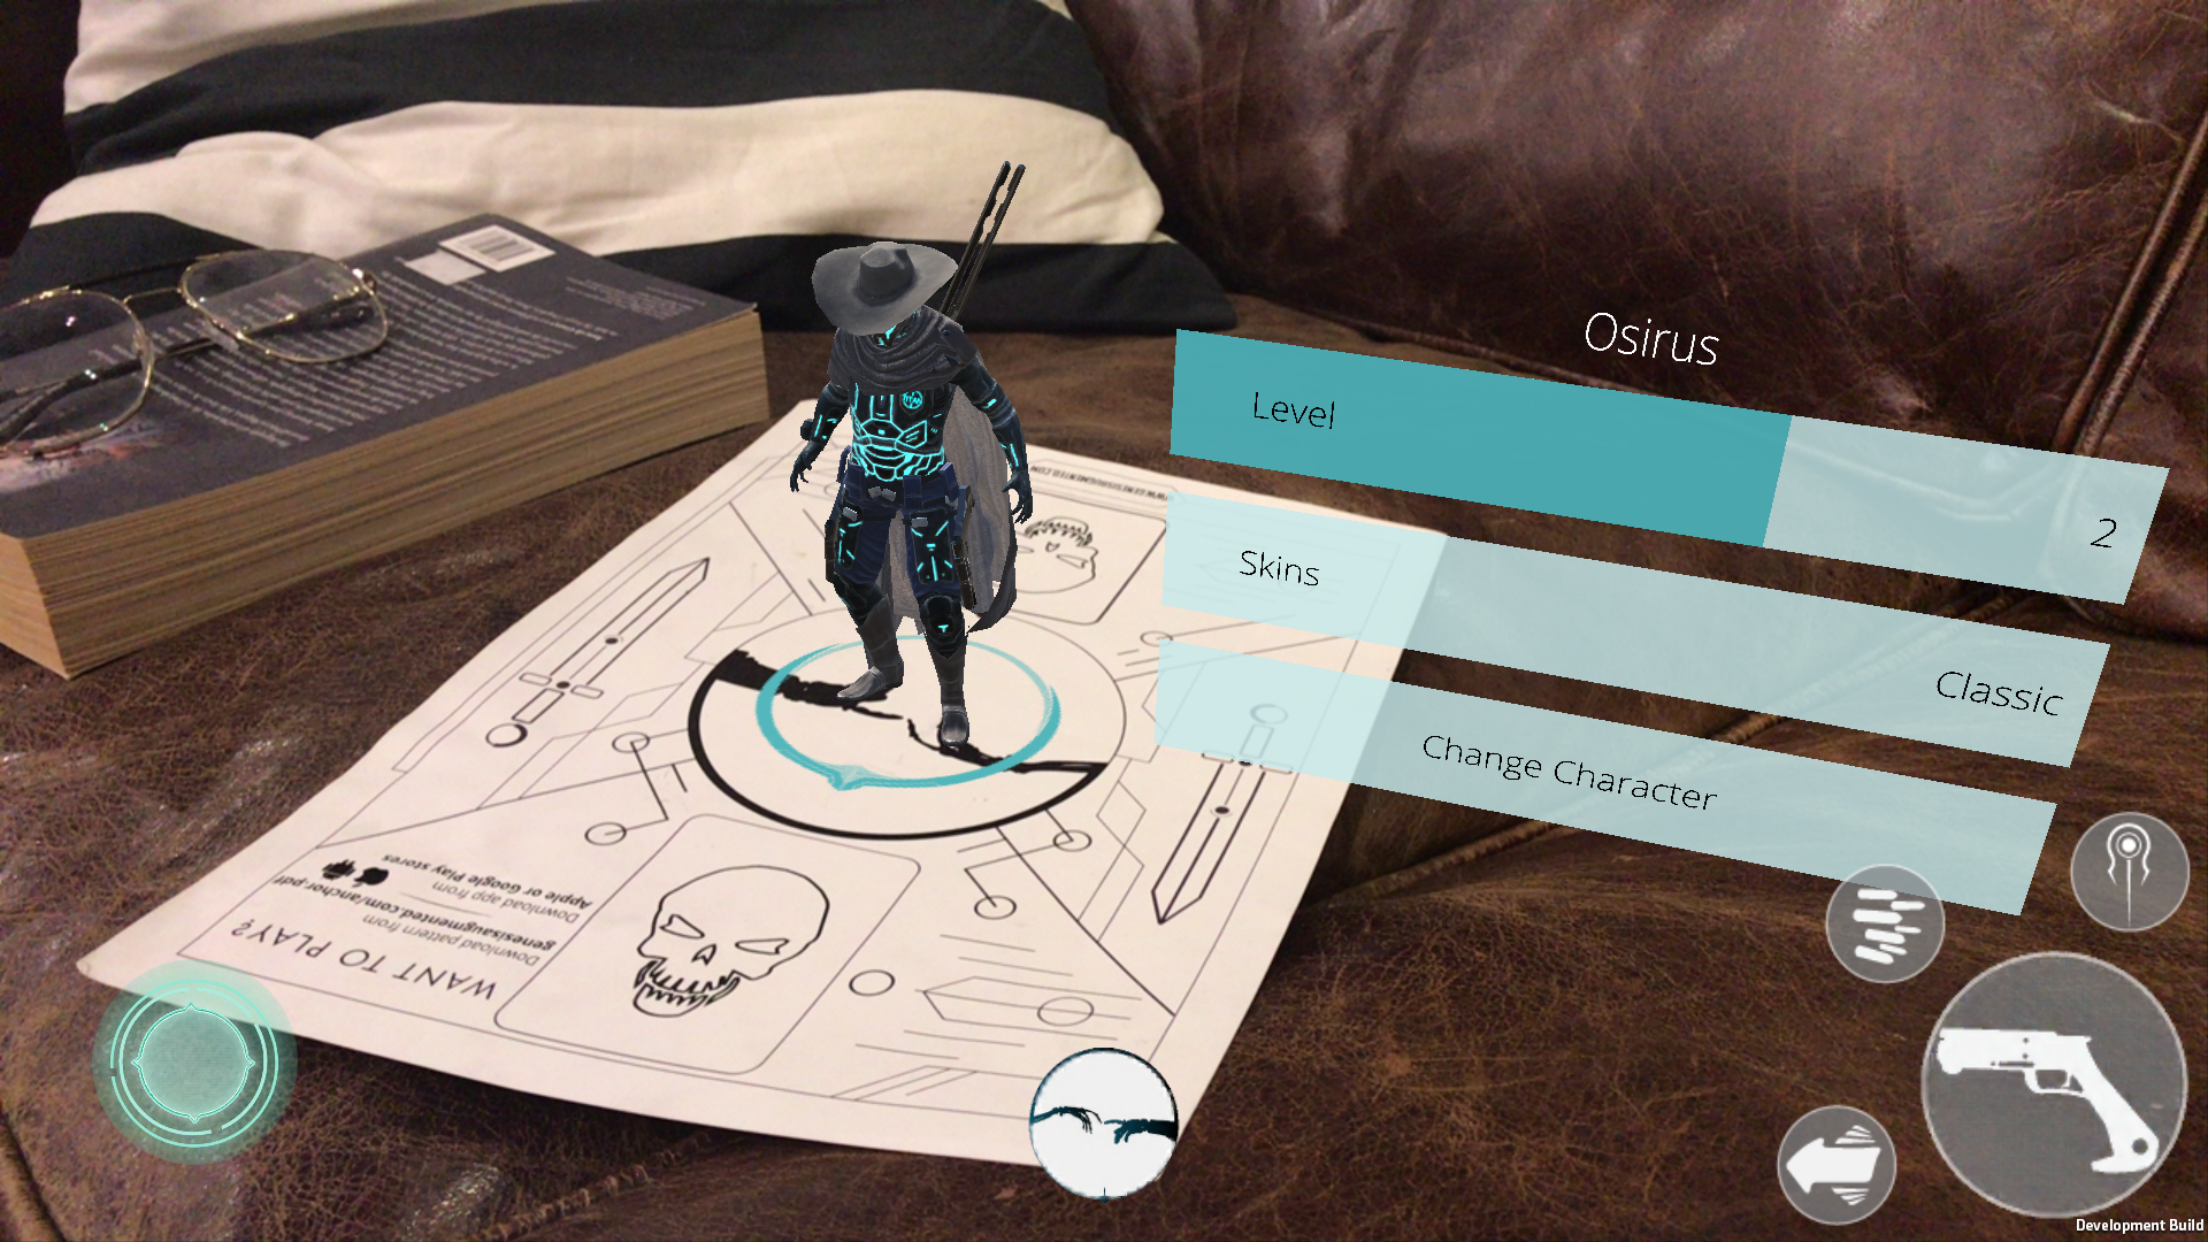 Genesis Augmented Reality playable character called Osirus in Augmented Reality on a table